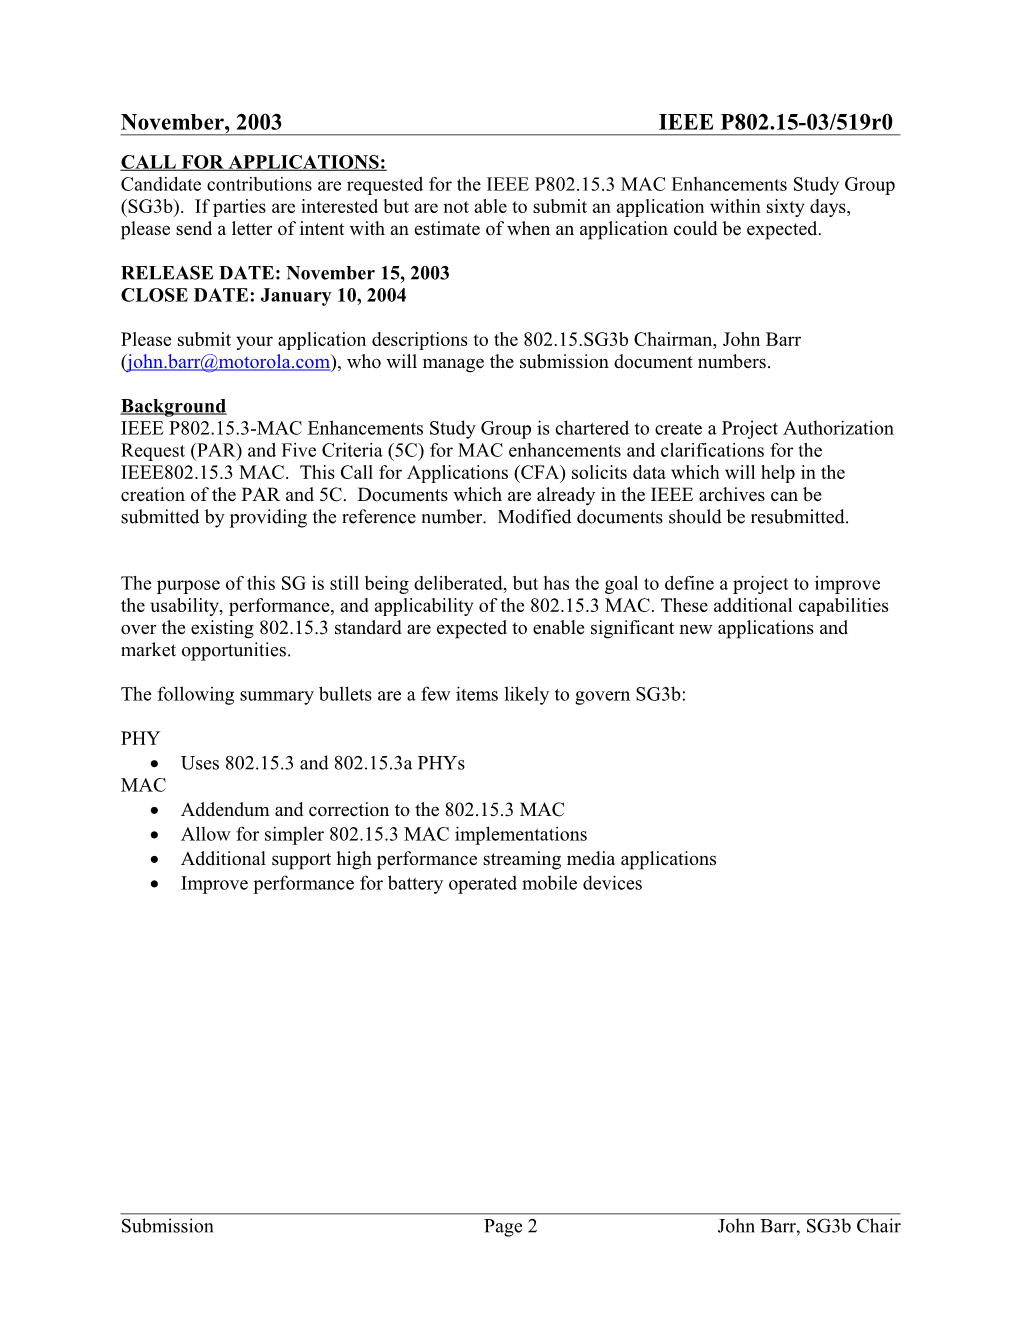 IEEE P802.15.Sg4a Call for Applications